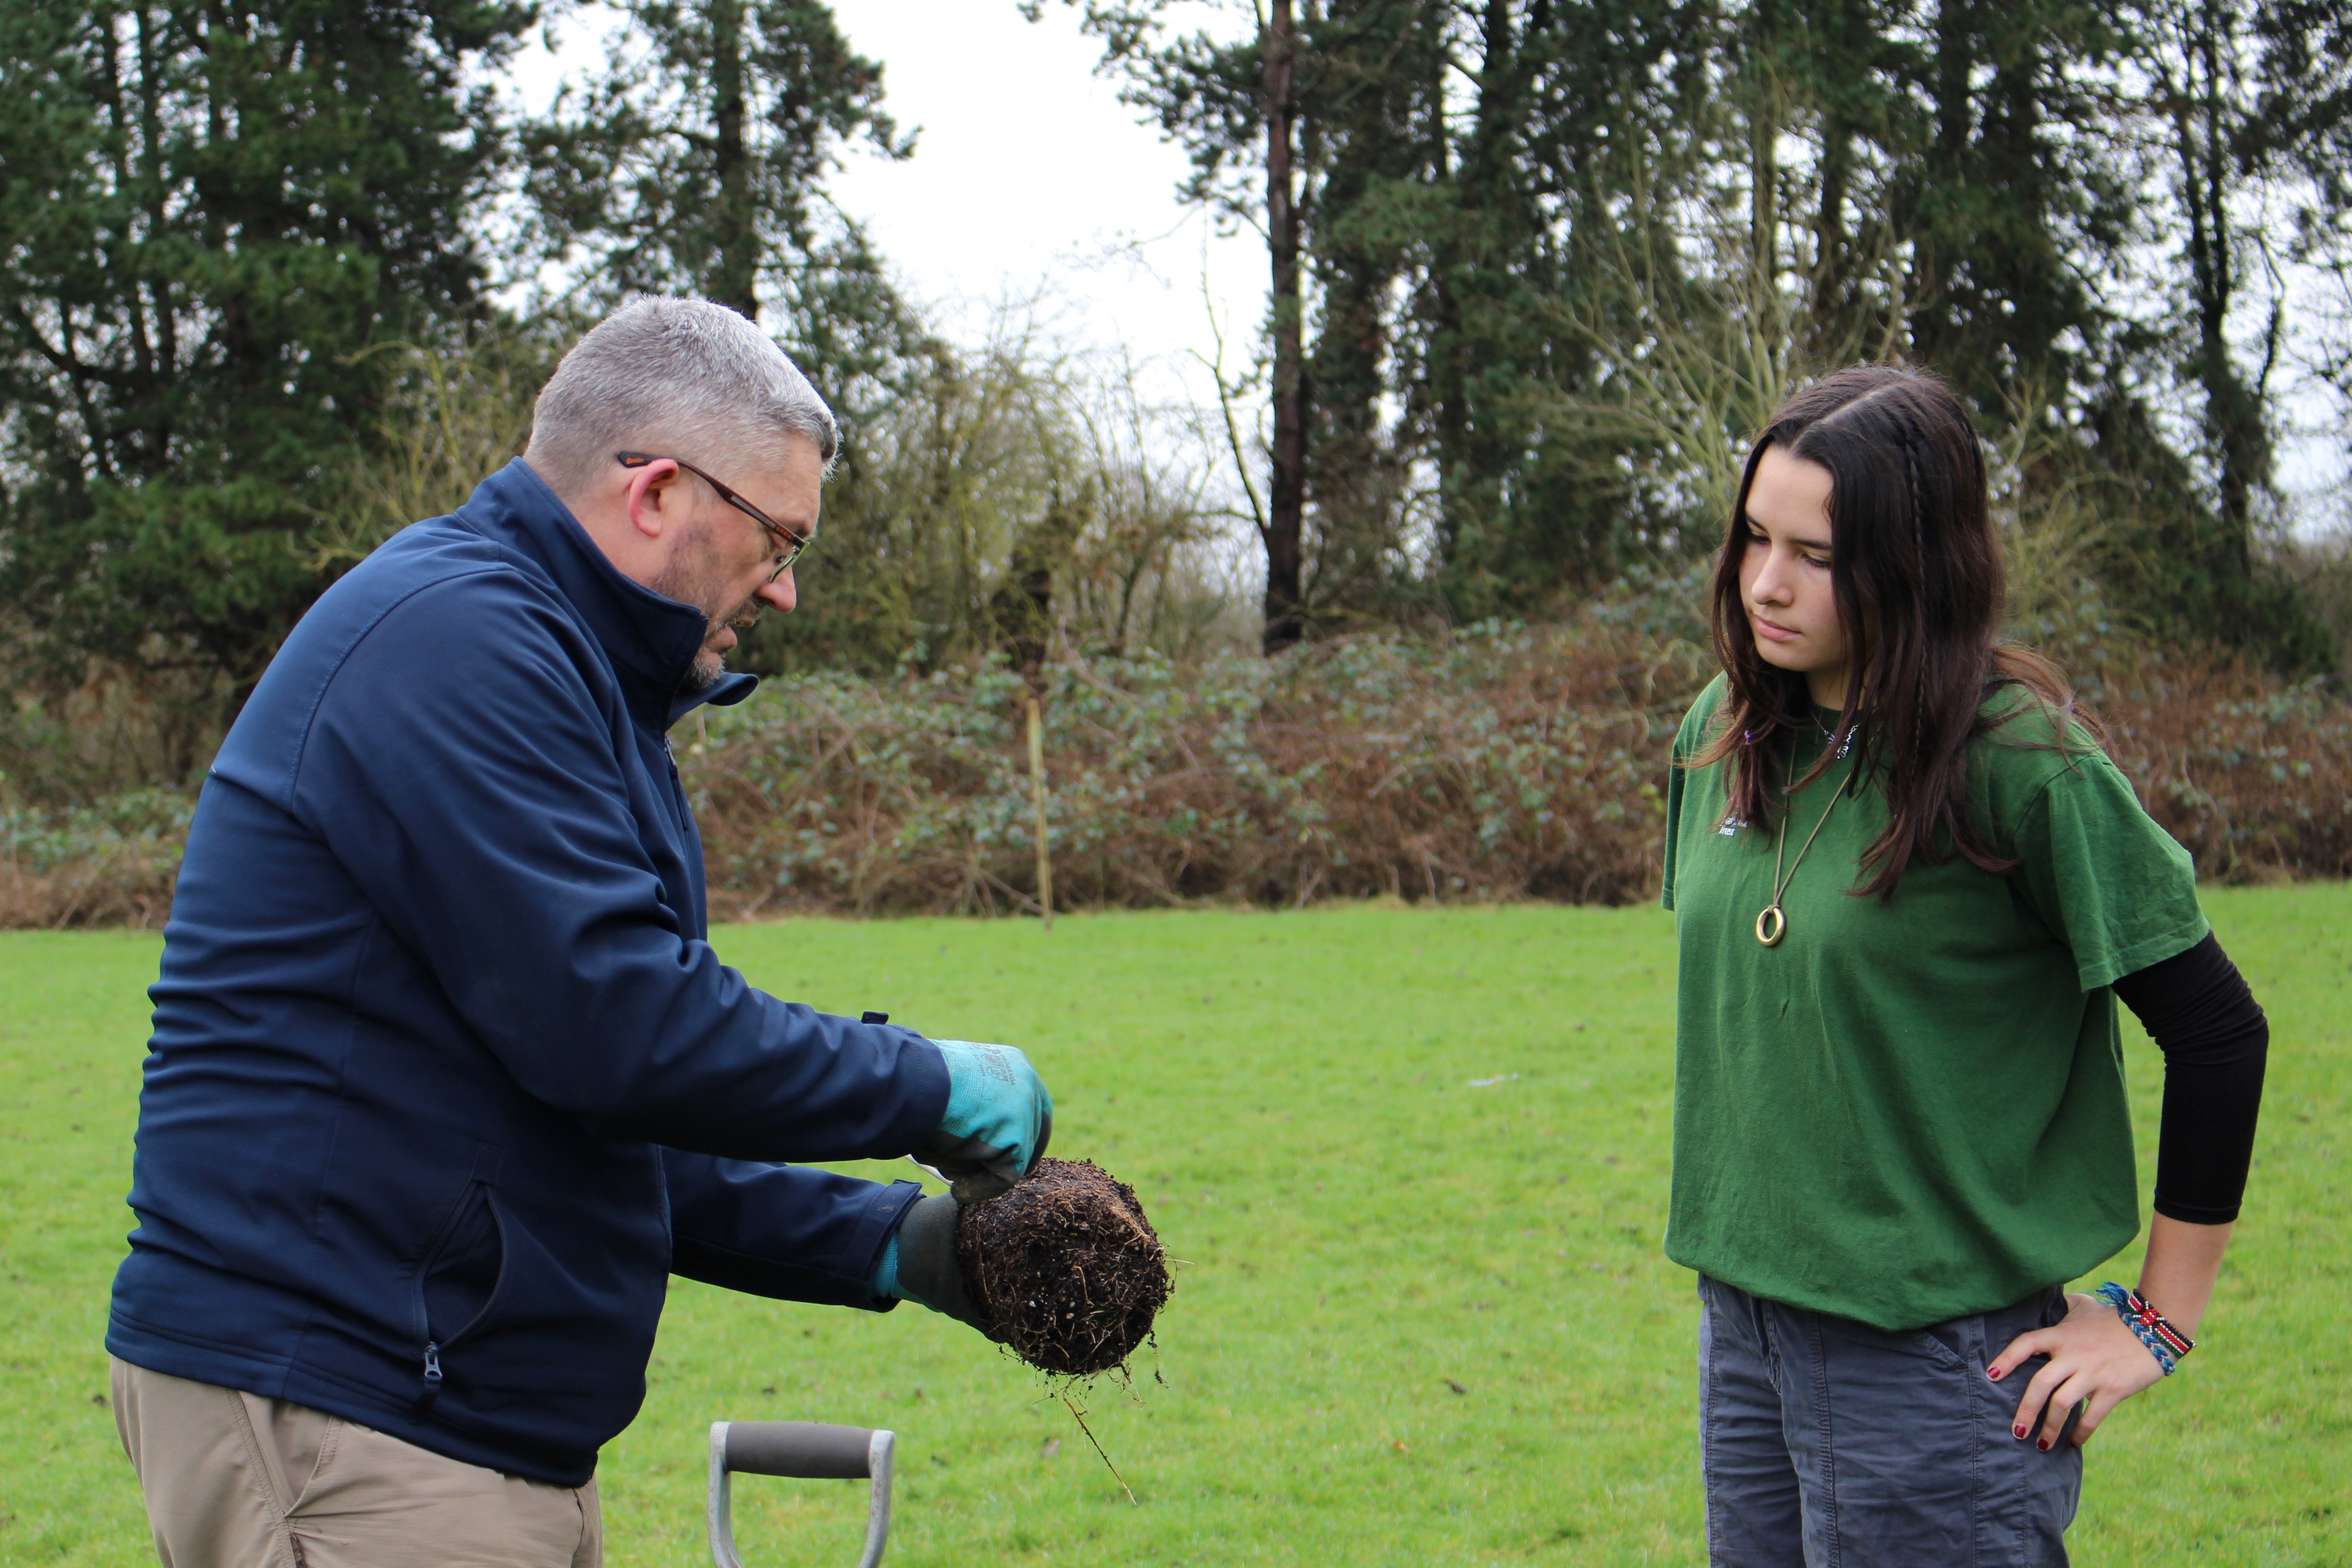 Man holding tree base, showing student how to correctly plant tree